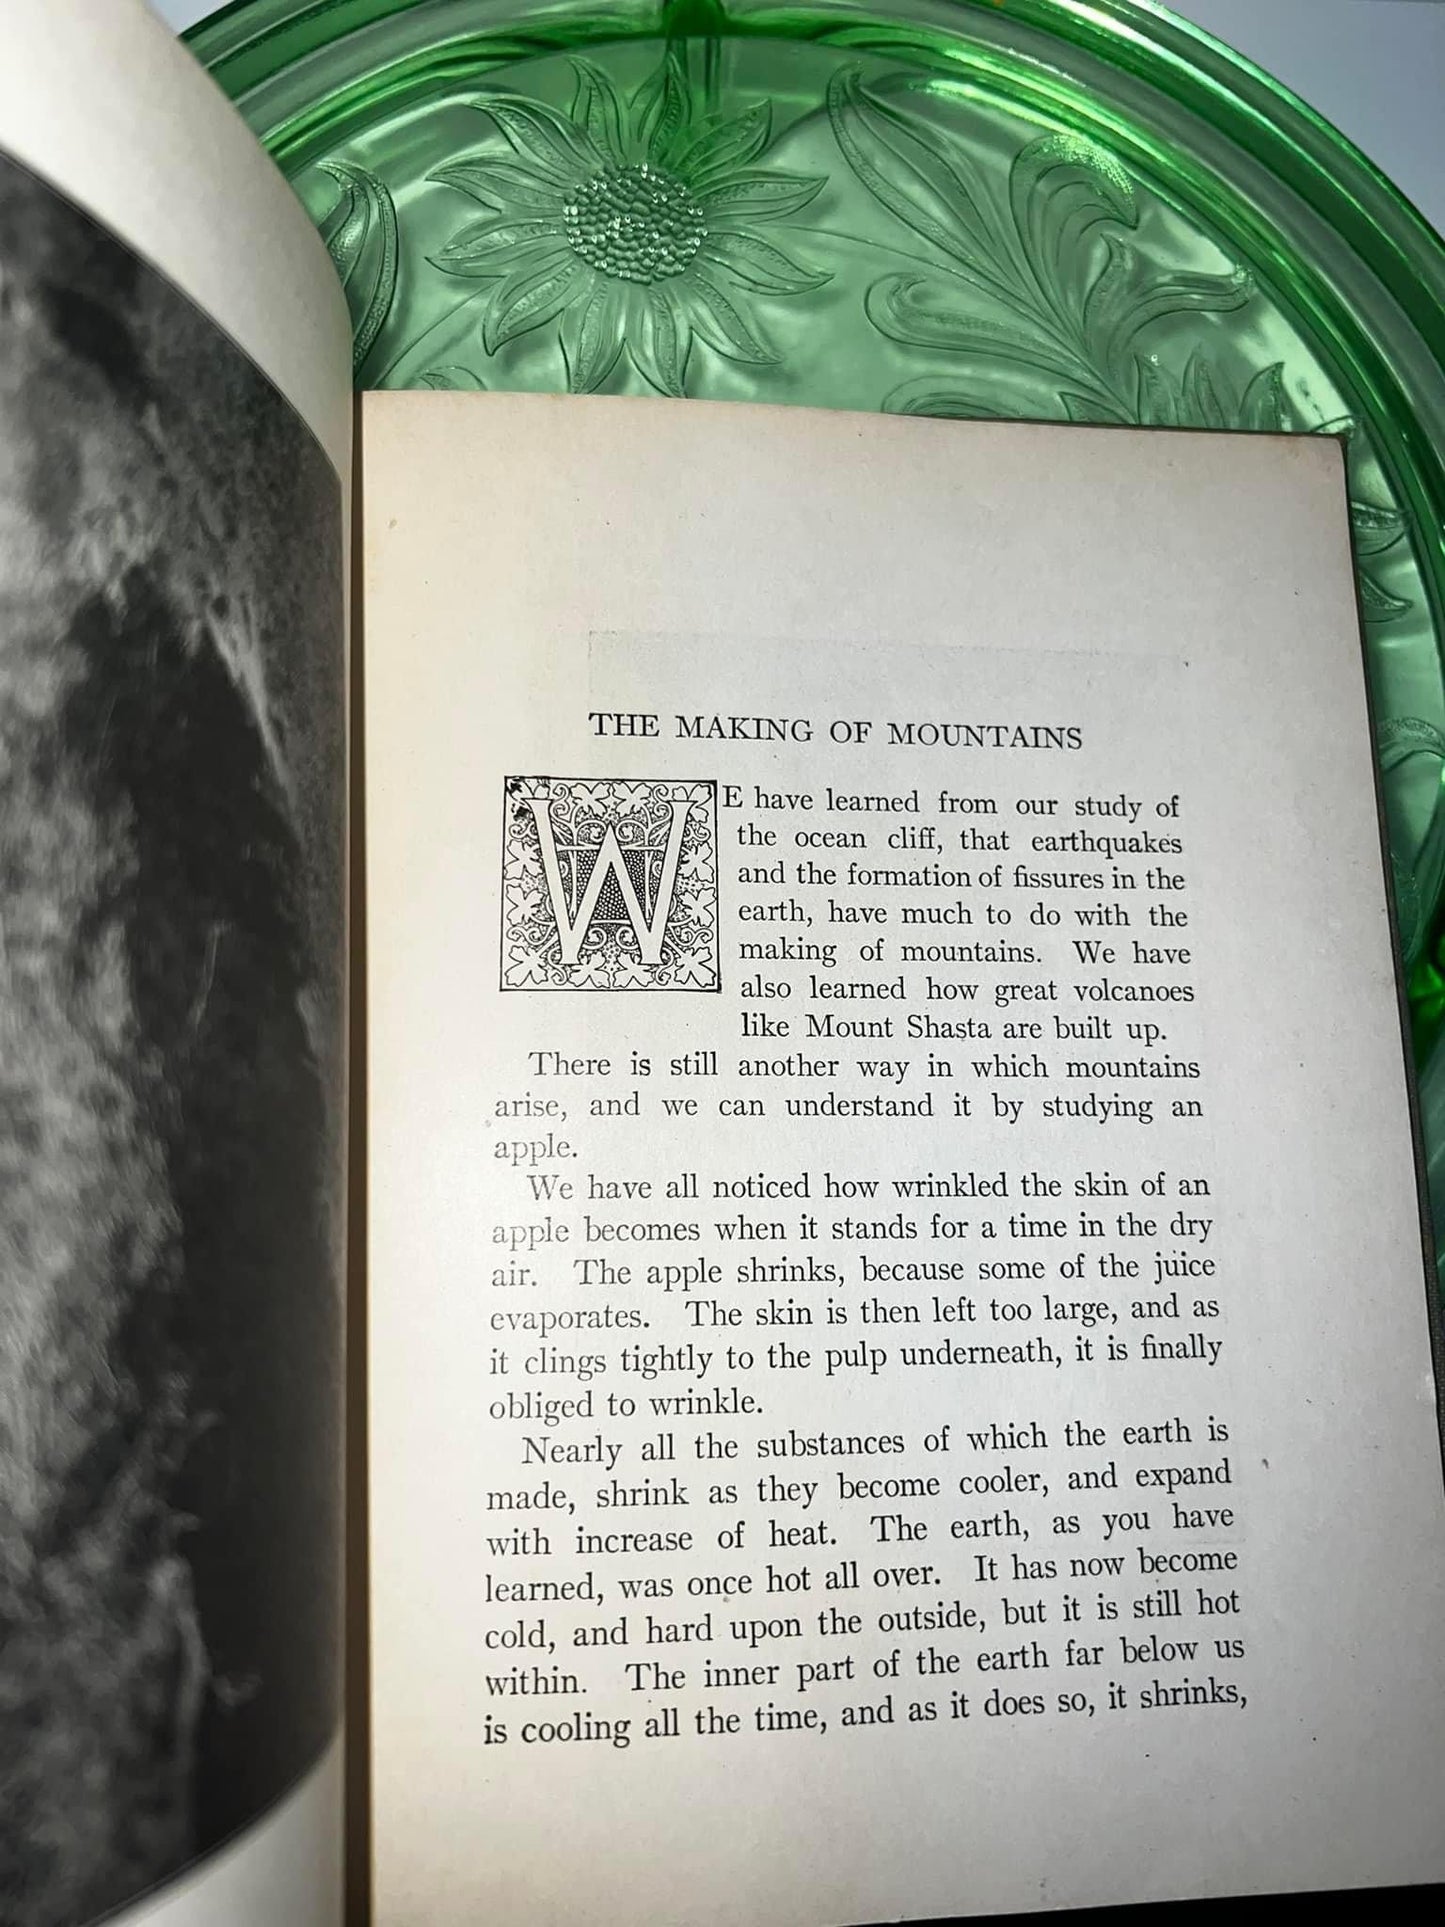 Vintage nature Stories of our Mother Earth C 1923 Illustrated